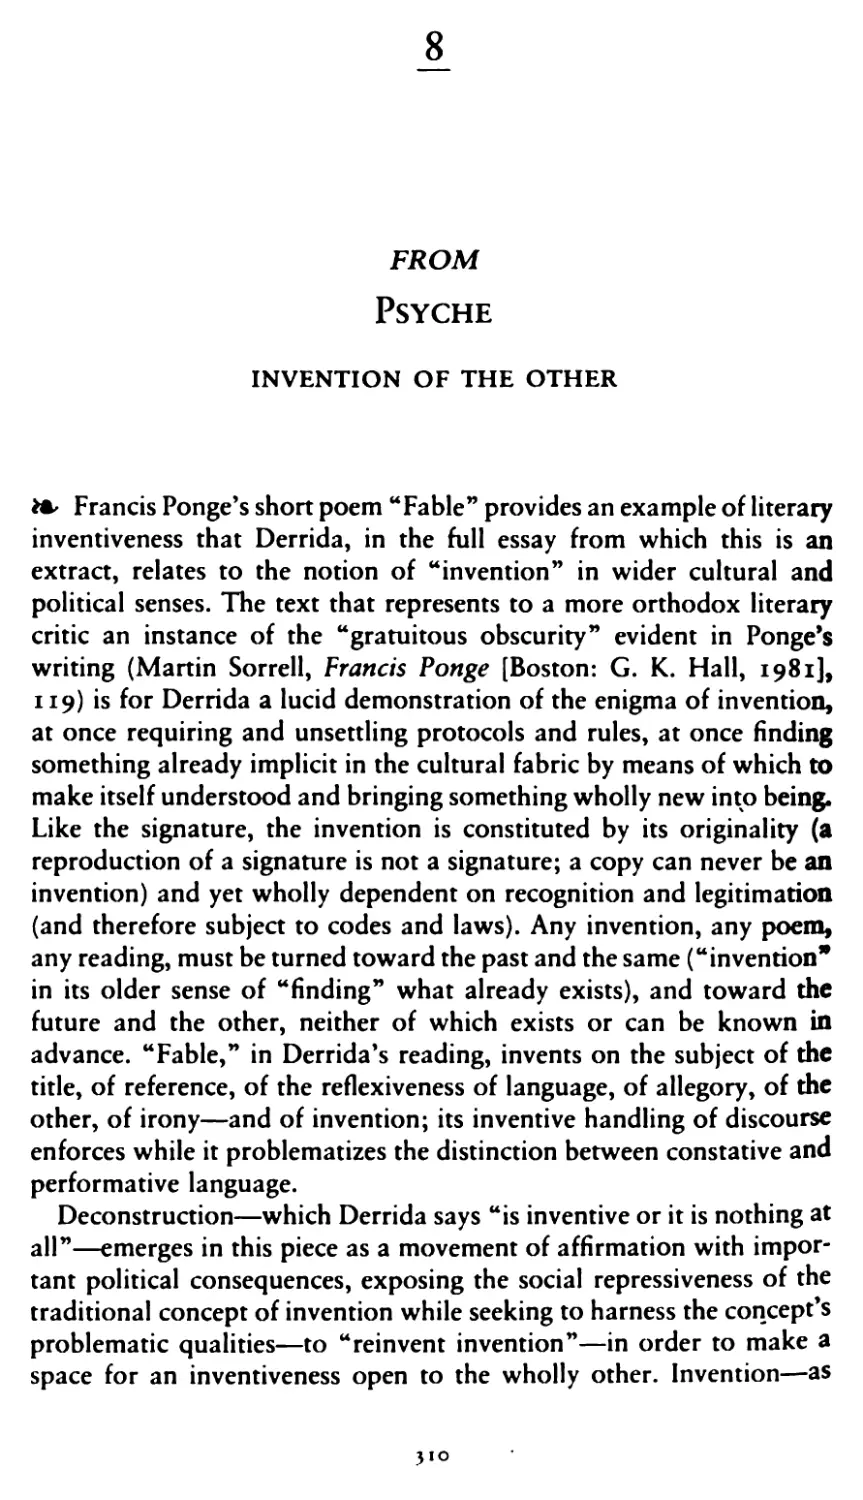 8.From Psyche: Invention of the Other